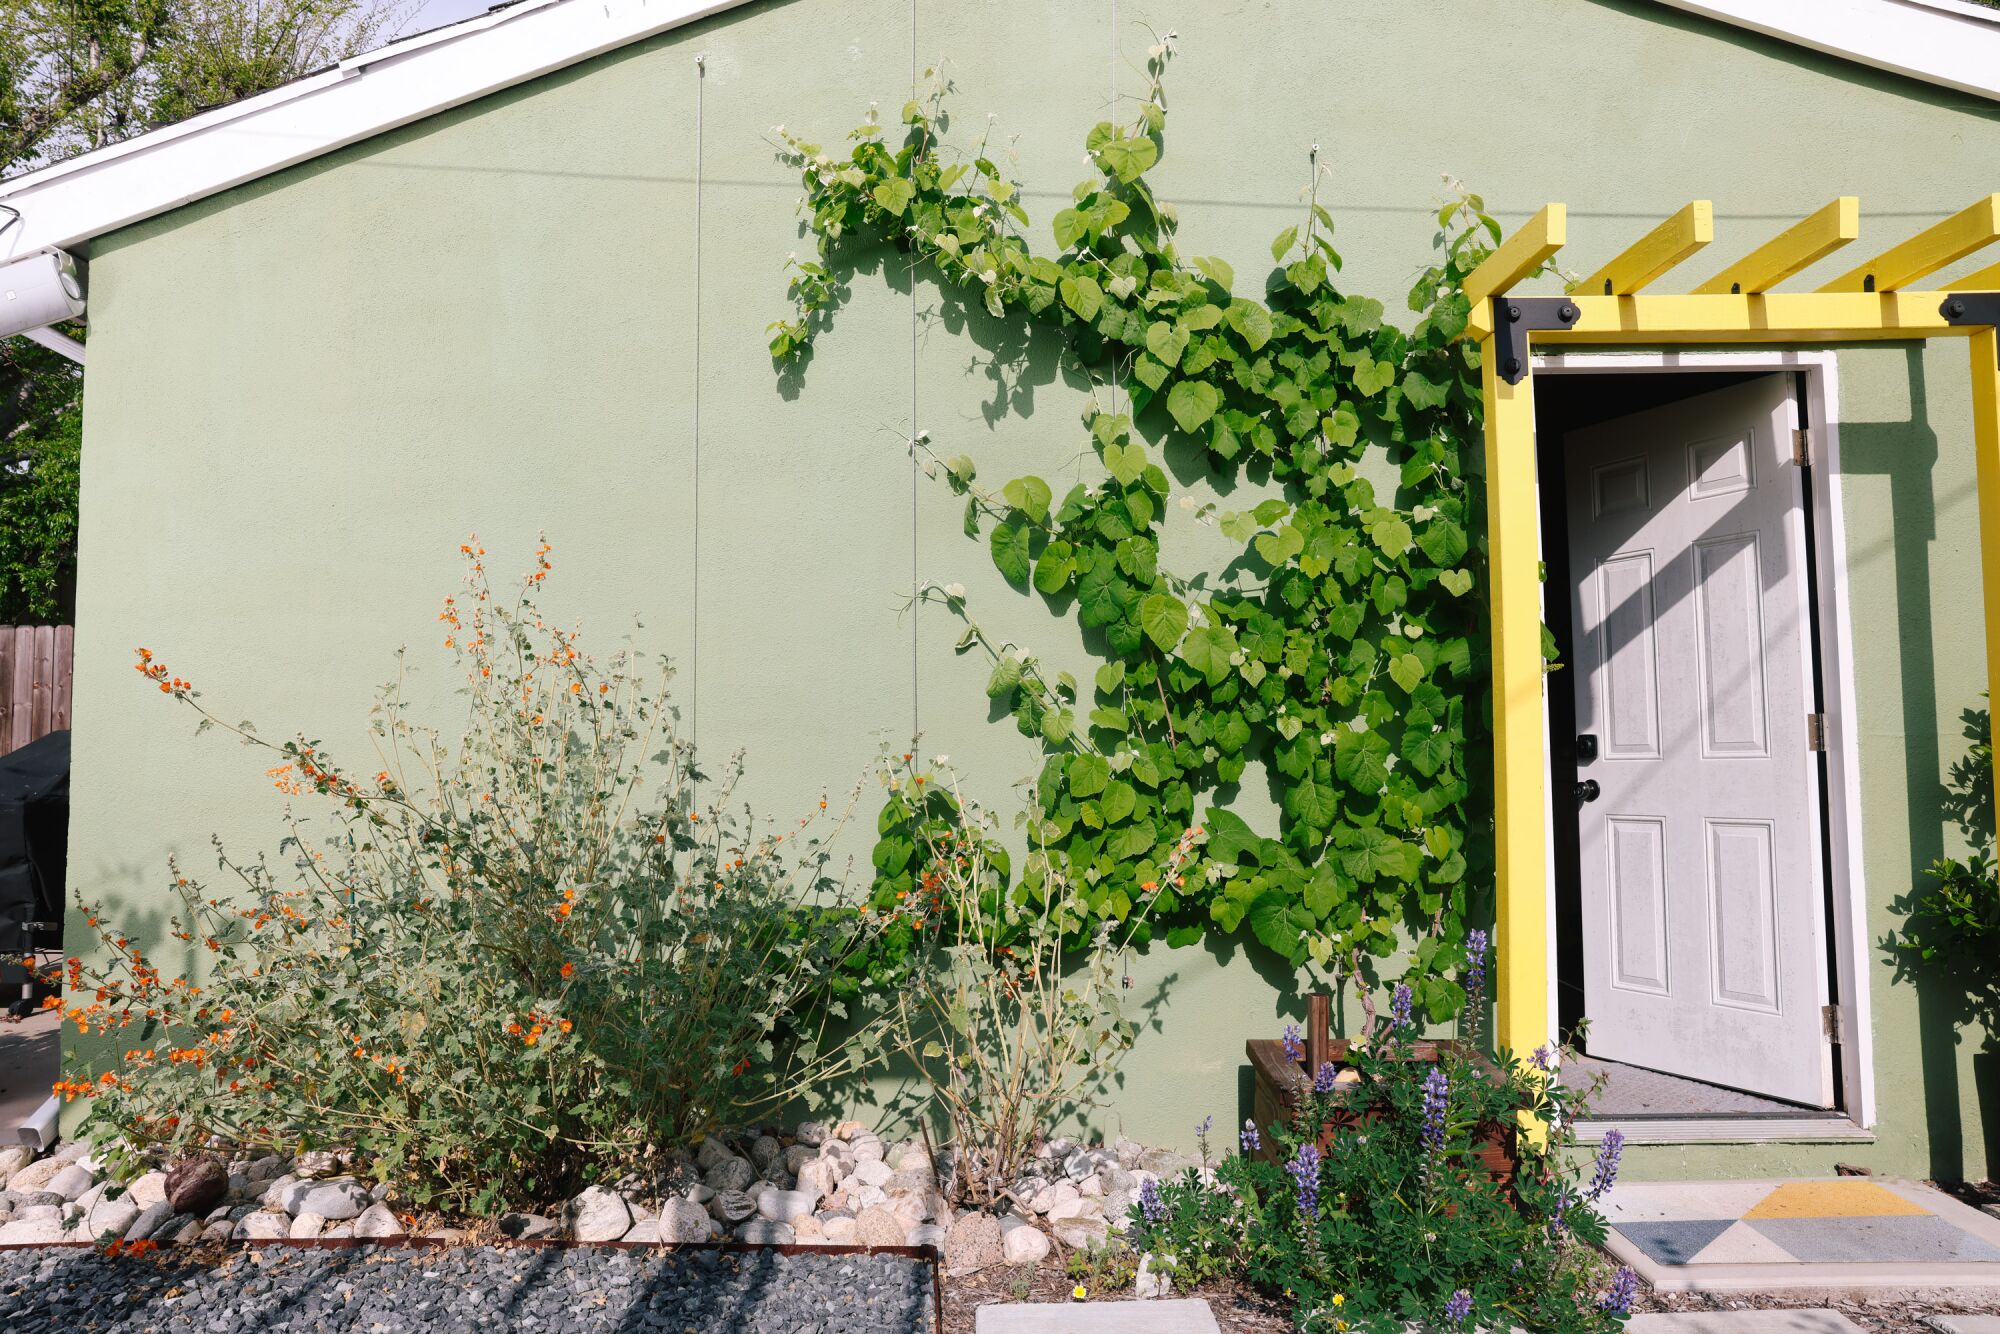 Apricot mallow, left, desert grape vine, right, and arroyo lupine, bottom right, grow on the garage 